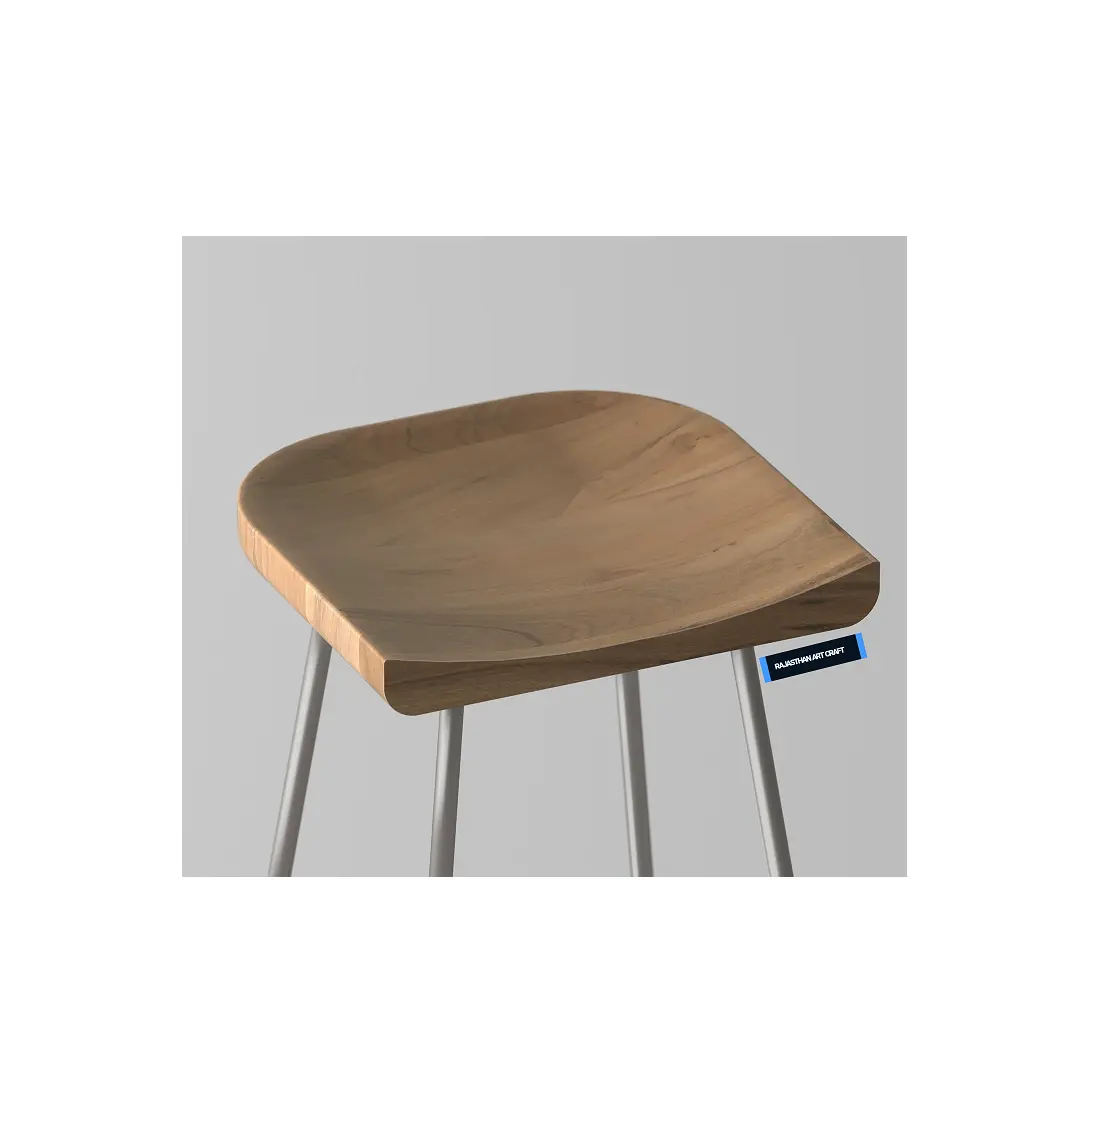 Most Selling High on Demand Wooden Stool for Living Room Decoration Use Available at Low Price from India